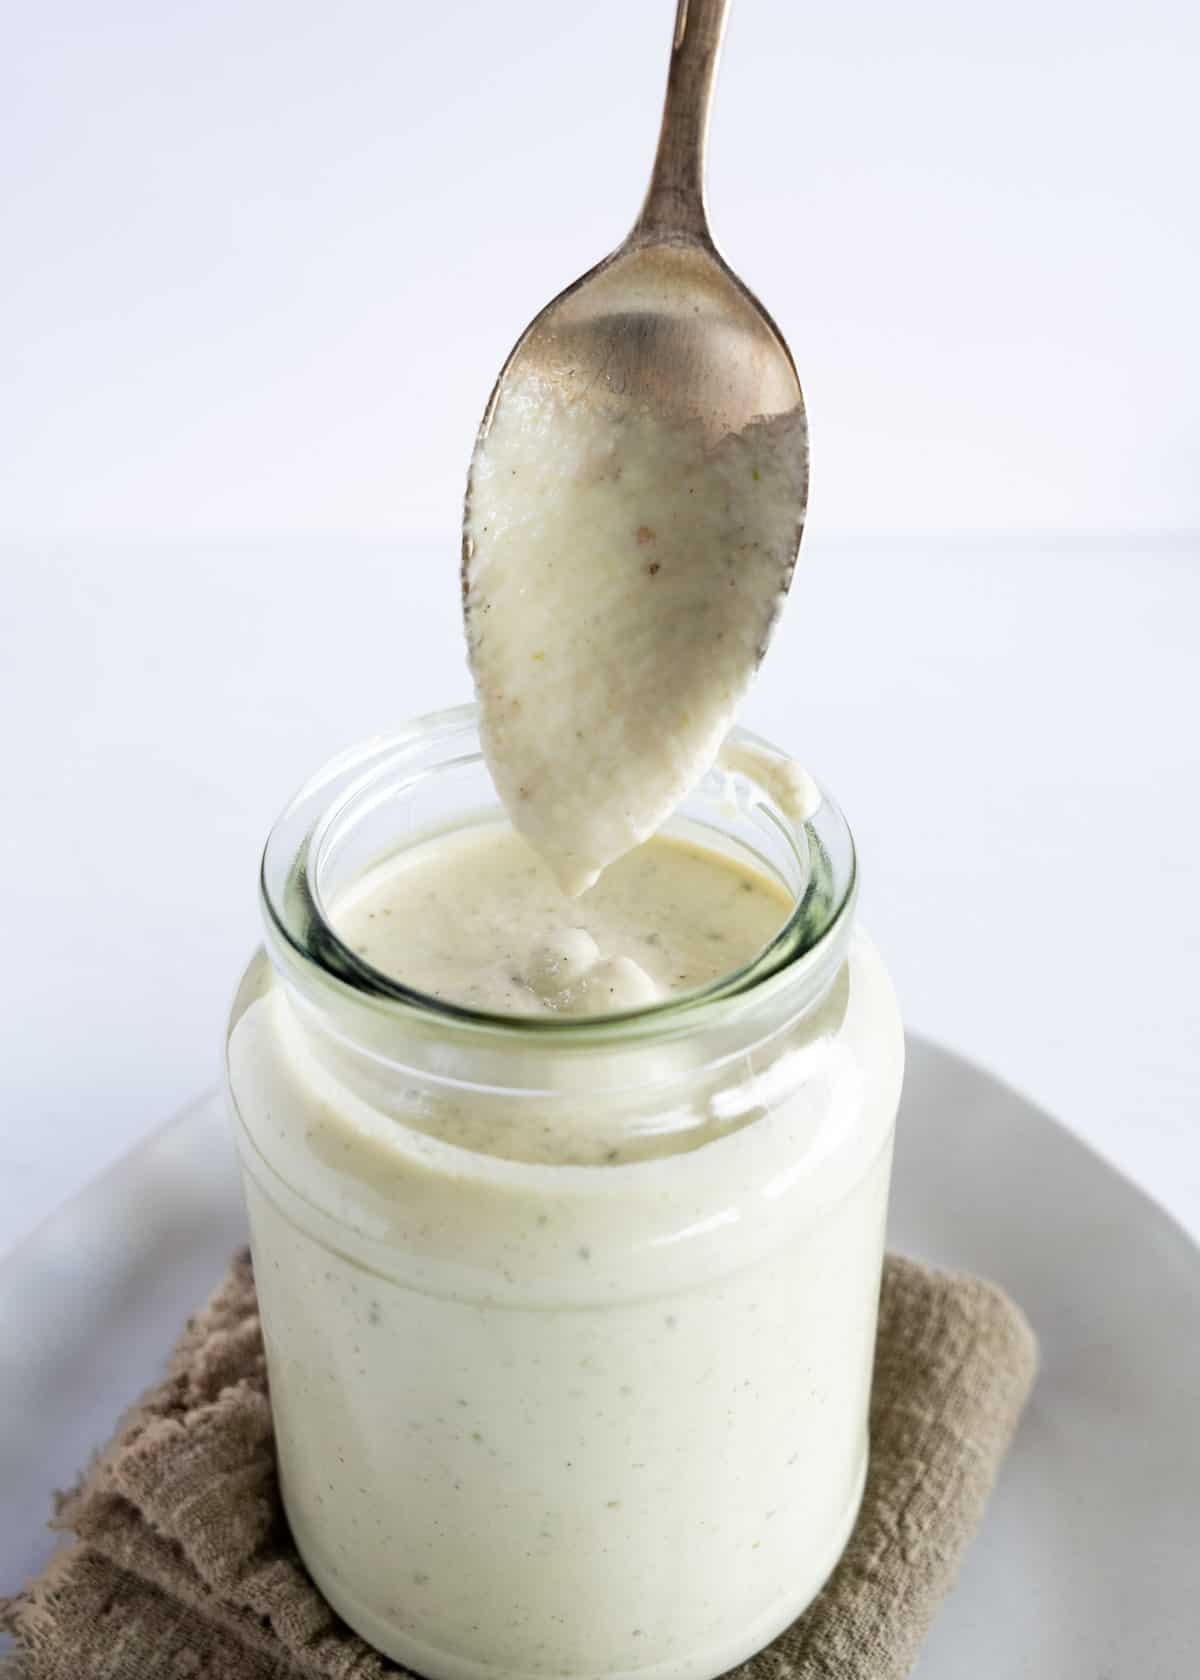 a glass jar filled with white sauce with a spoon dripping it in